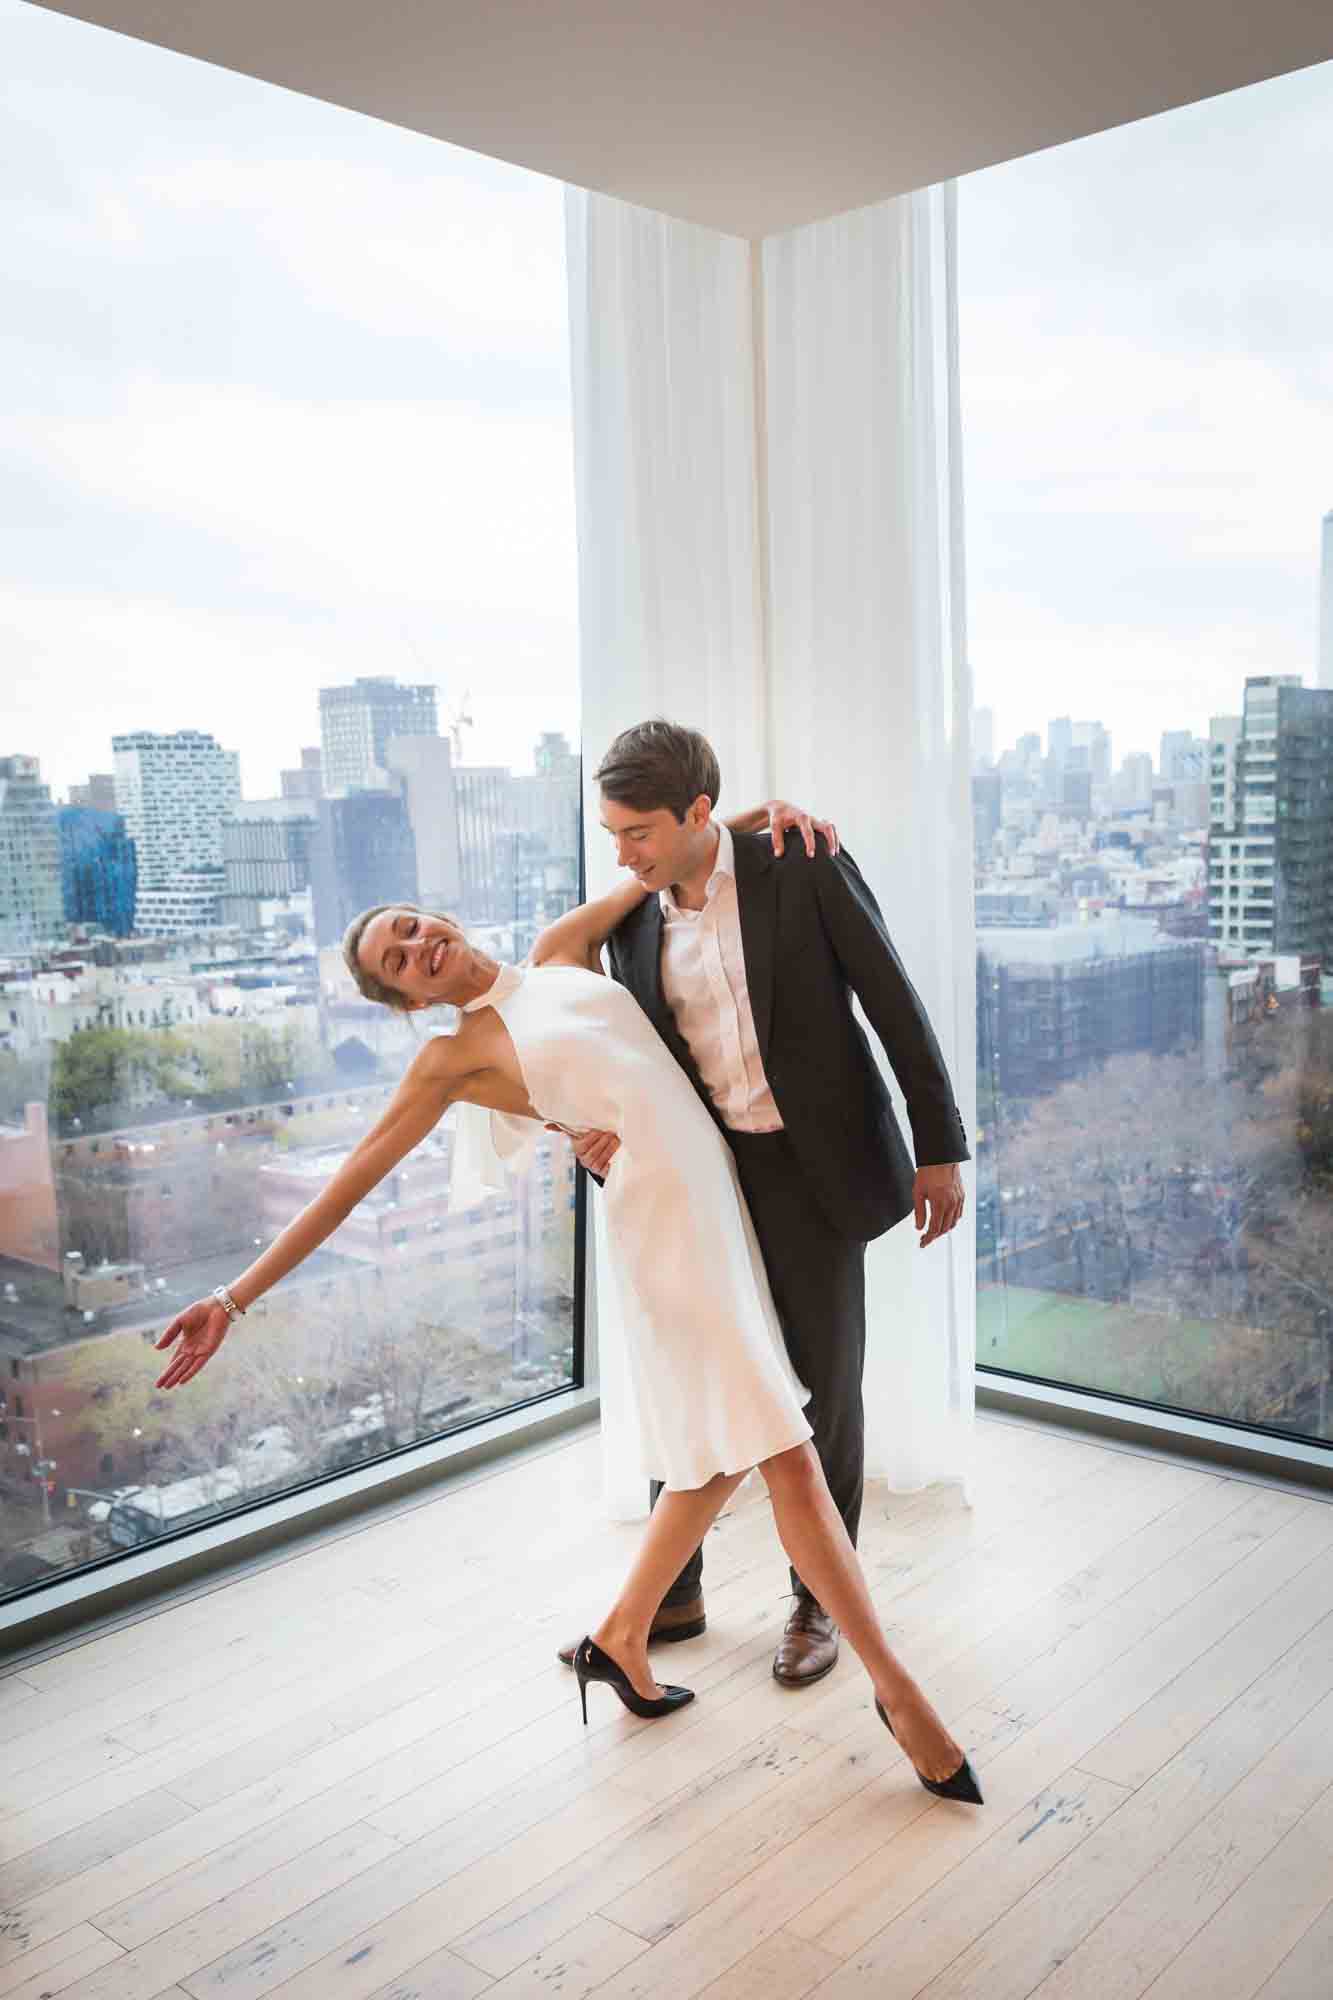 Man holding woman in dance move in front of windows